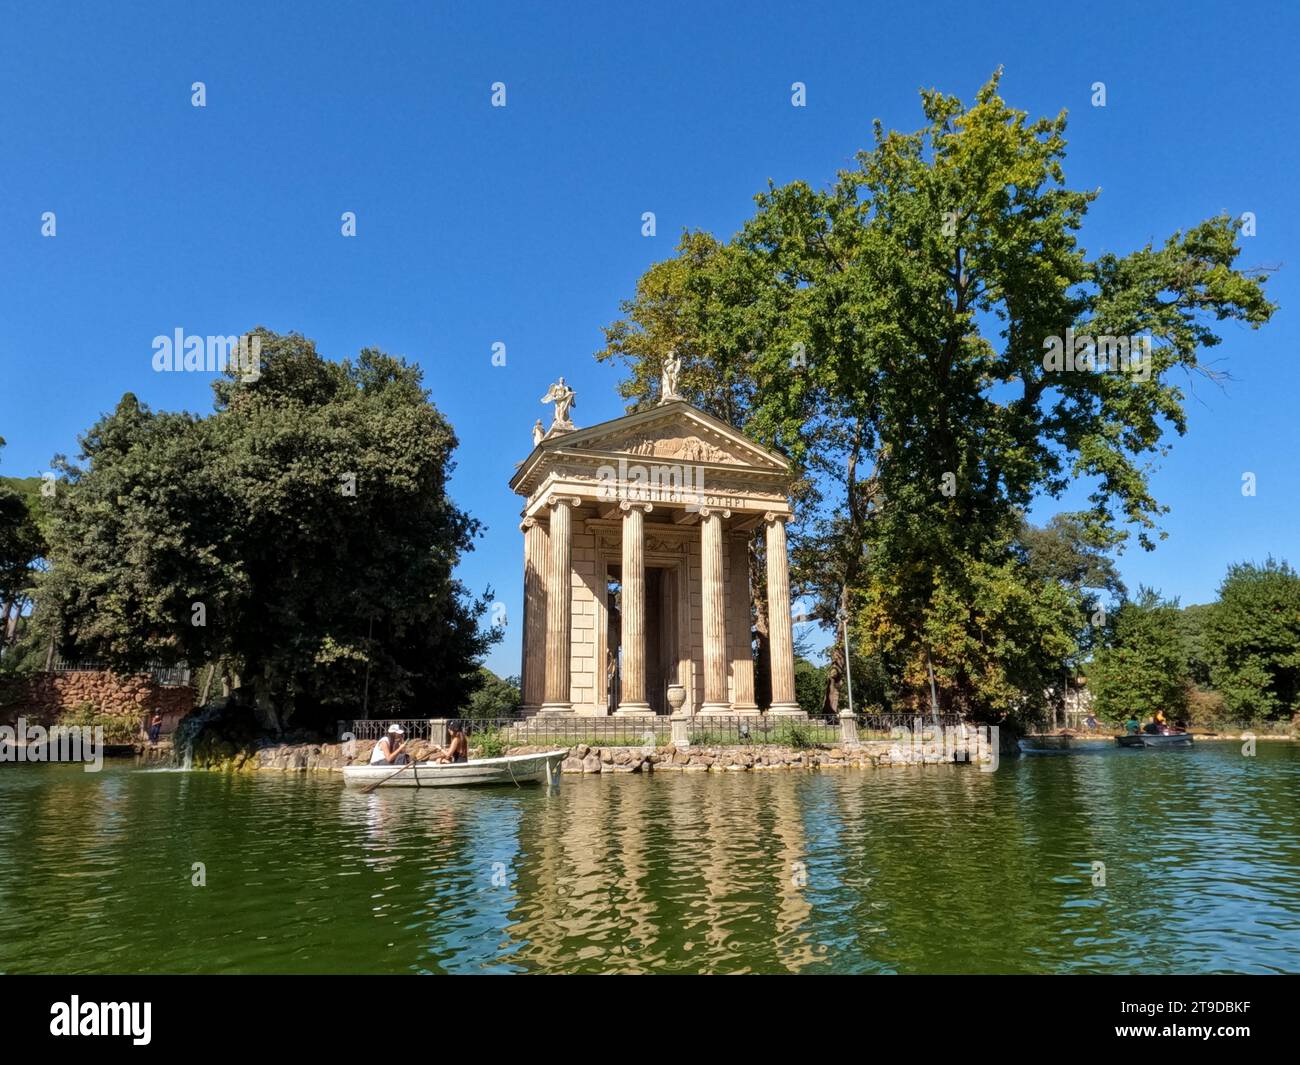 Boating at Temple of Aesculapius in Villa Borghese, Roman Park. Stock Photo